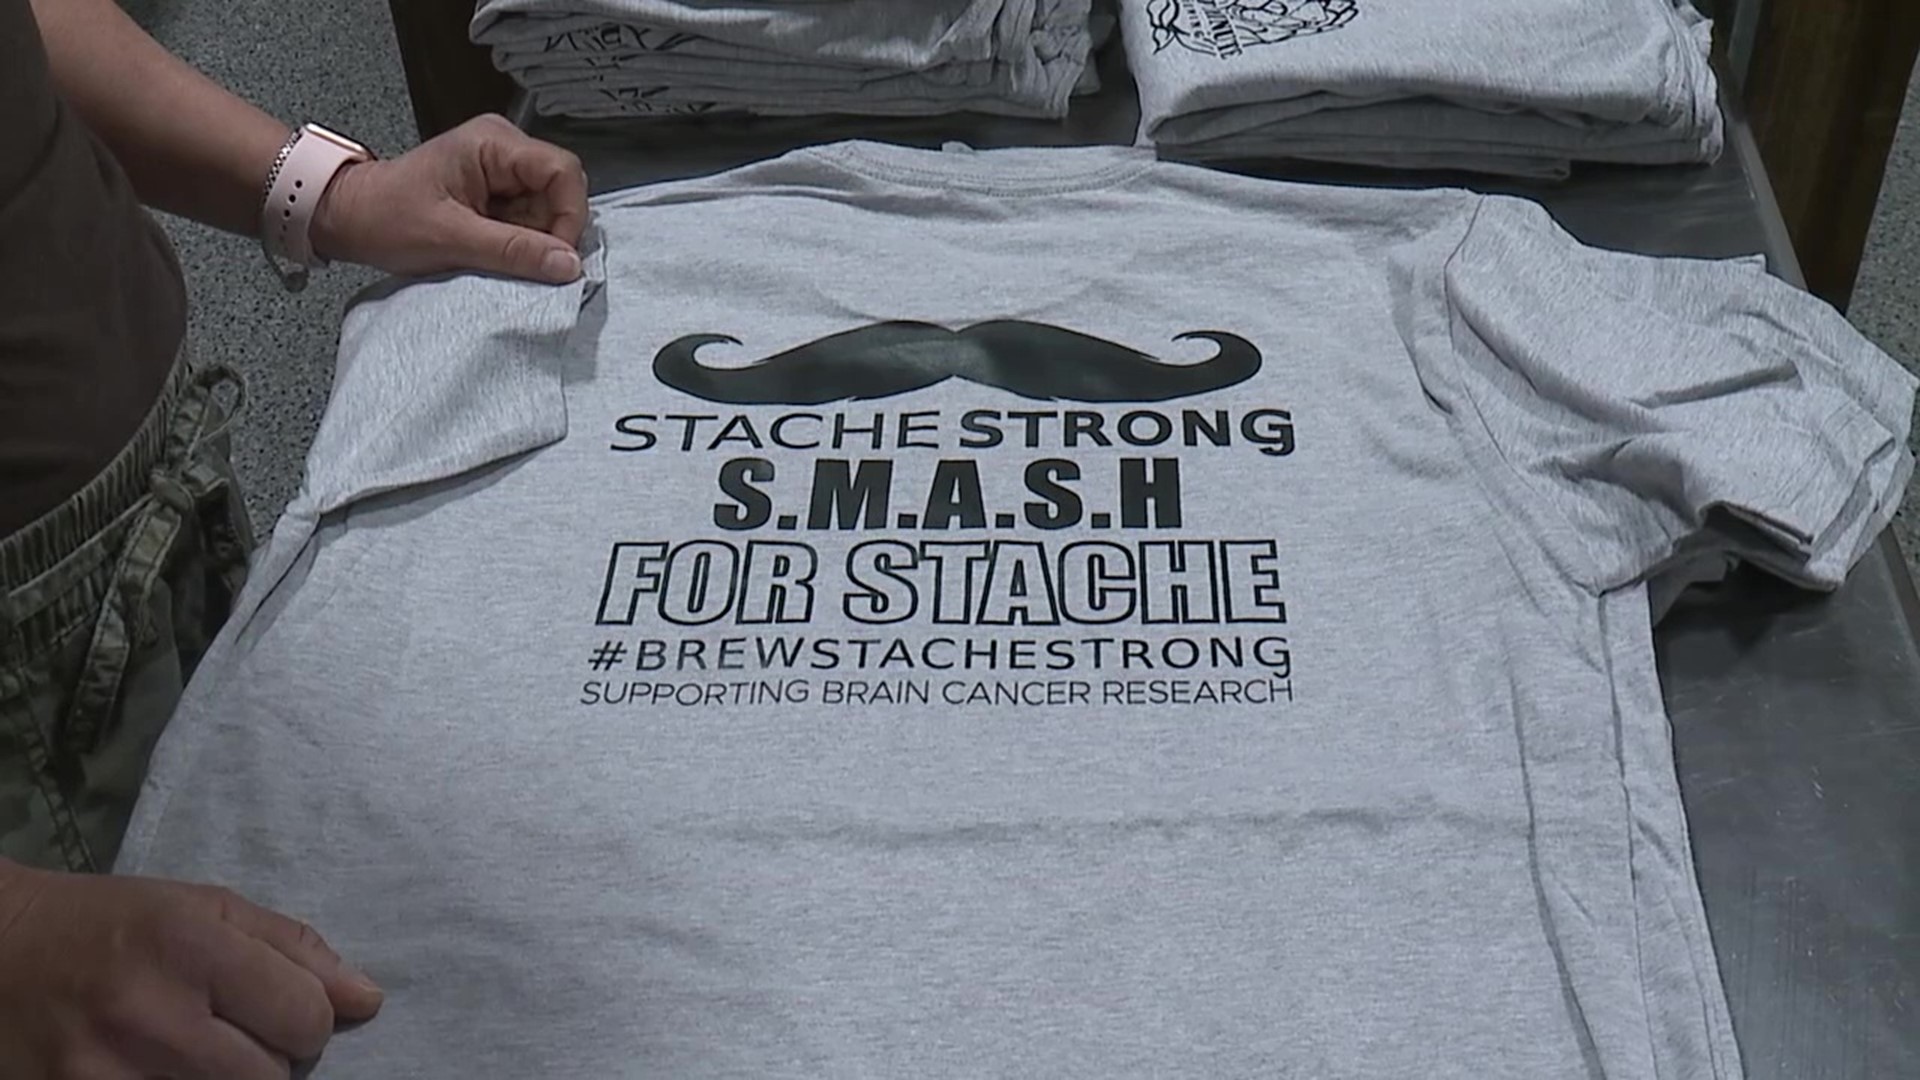 Last Minute Brewing in Scott Township will sell a new craft brew in honor of Lexi Caviston, who passed away from a rare form of brain cancer last year.